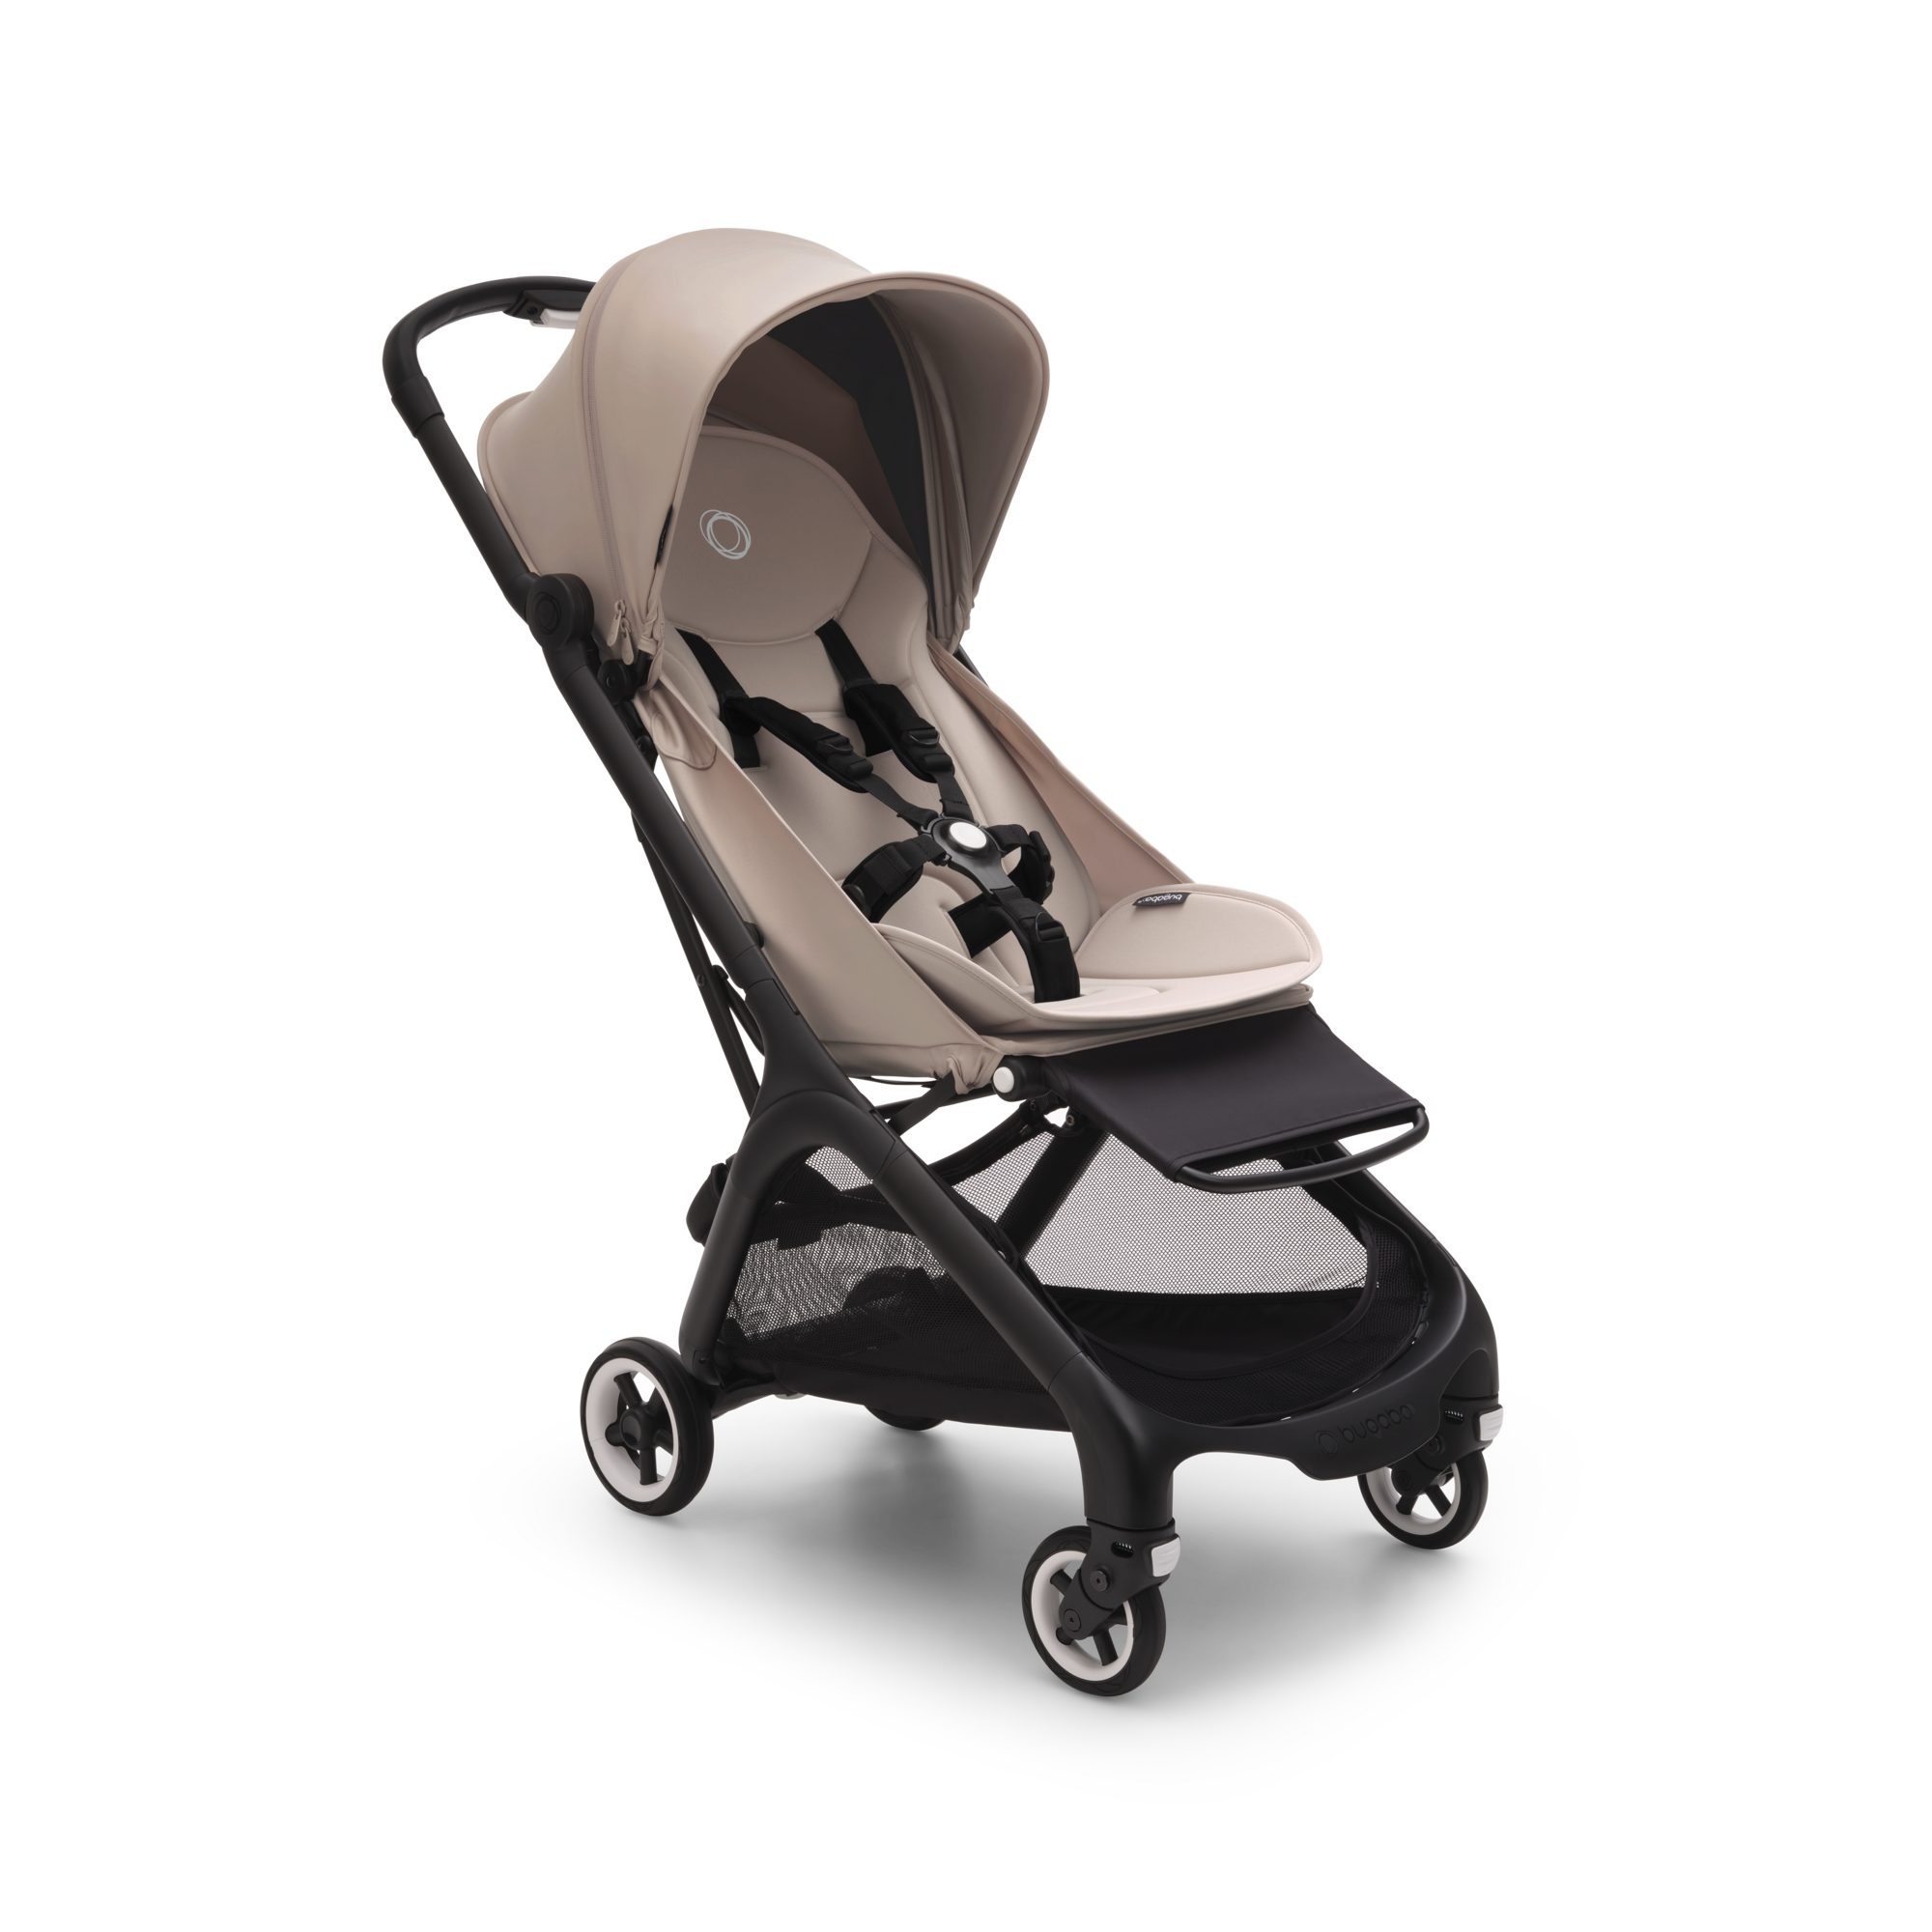 https://www.bugaboo.com/on/demandware.static/-/Sites-bugaboo-master/default/dw9af412ab/images/PV007204/Bugaboo-Butterfly-stroller-black-chassis-desert-taupe-fabrics-desert-taupe-sun-canopy-x-PV007204-01.png